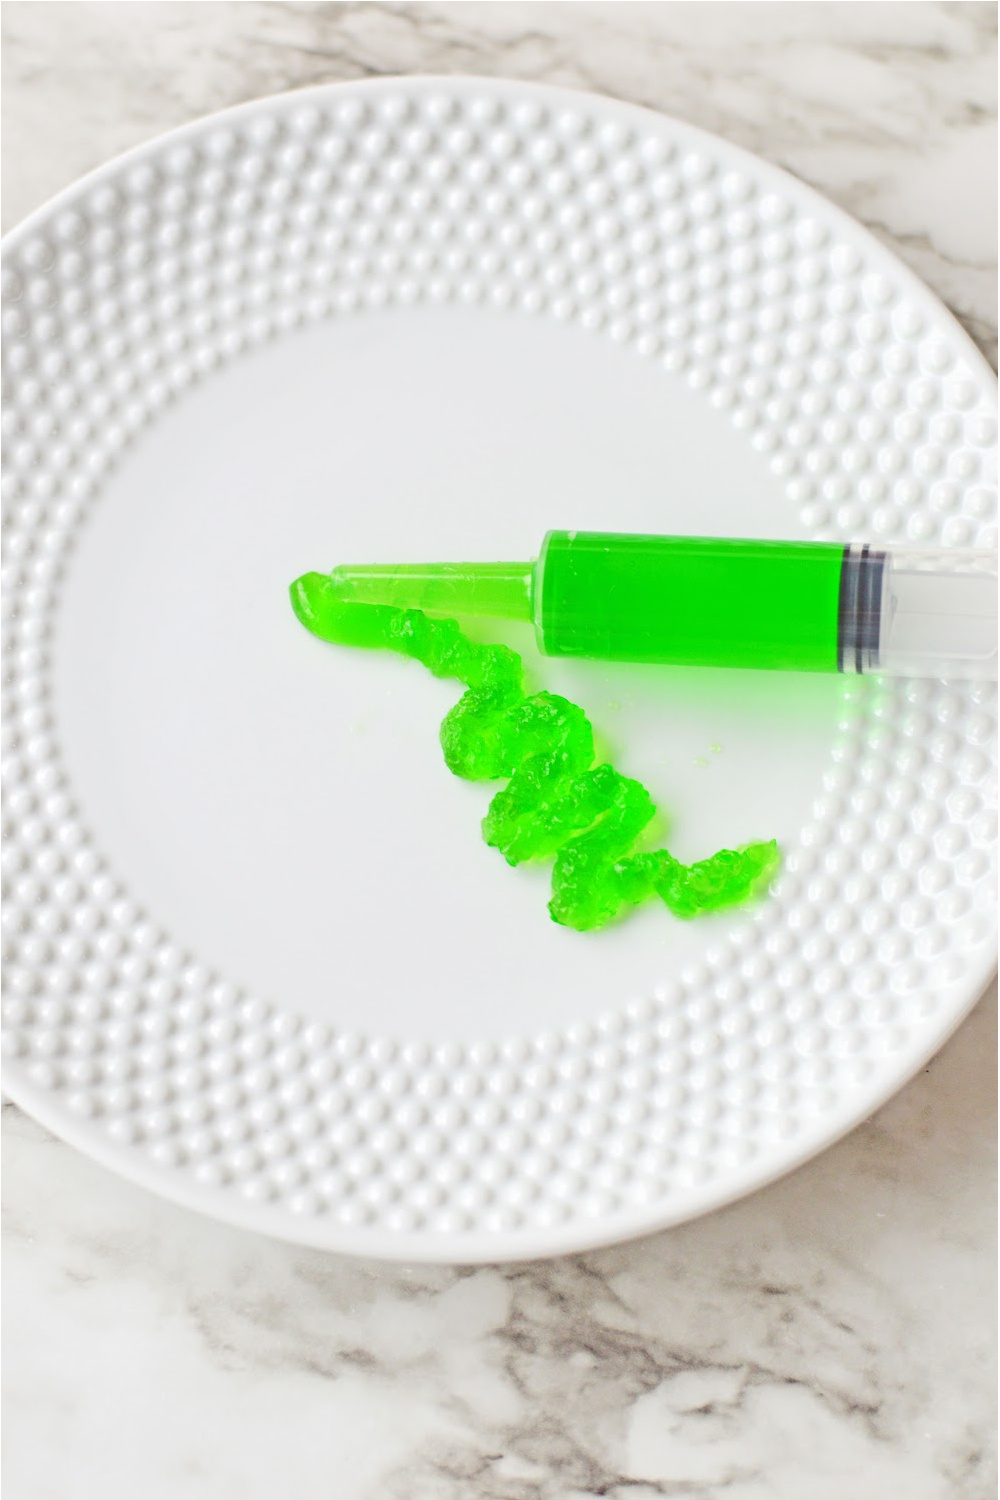 green jello being squeezed out of a syringe onto a white plate.